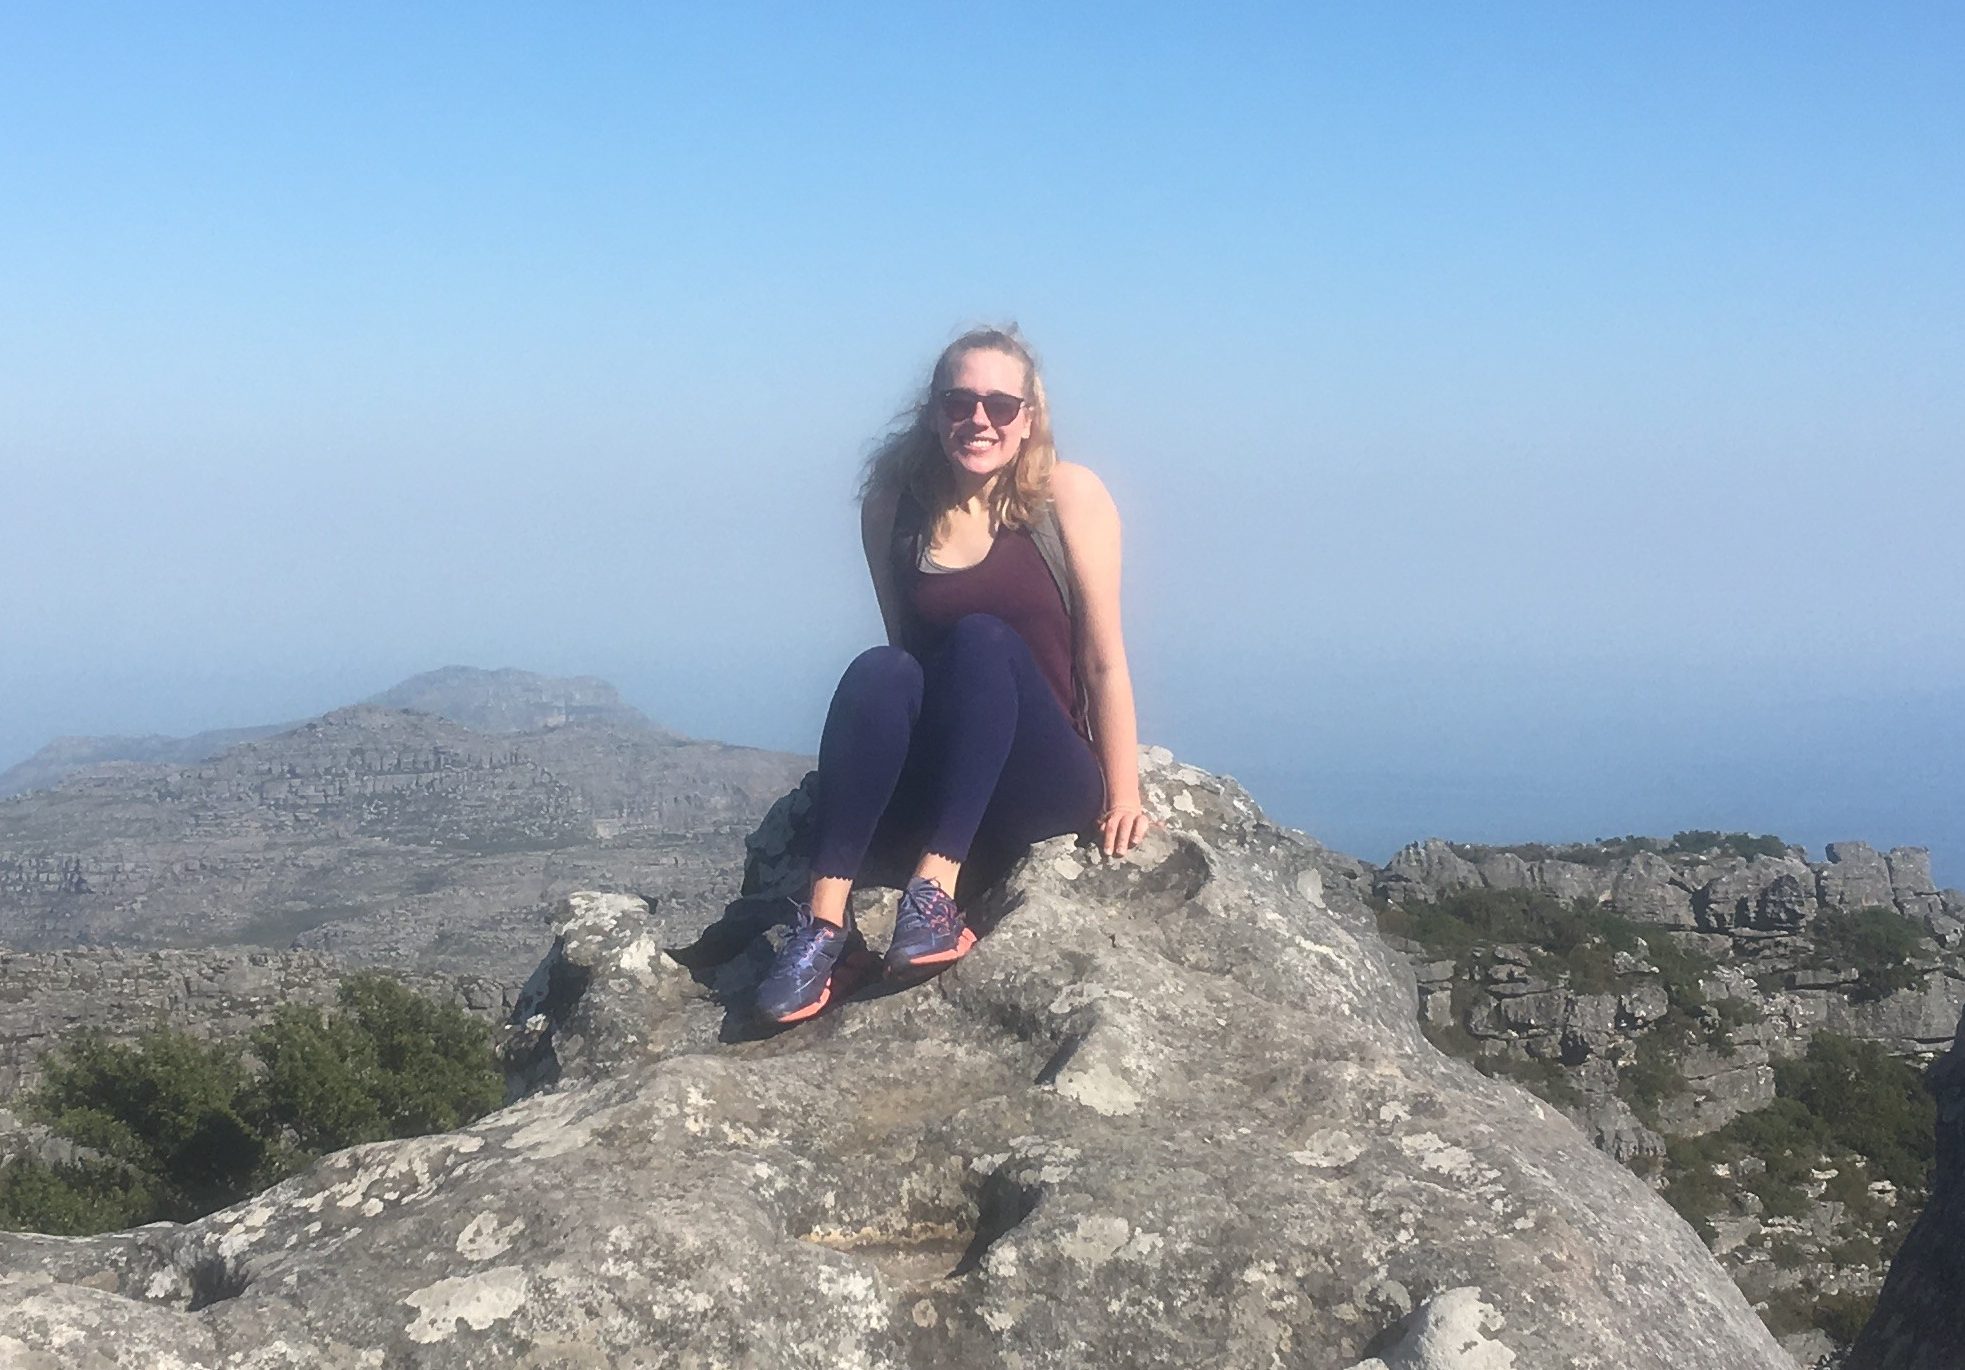 Alumna Abby Yates says South Africa continues to resonate in her life back home